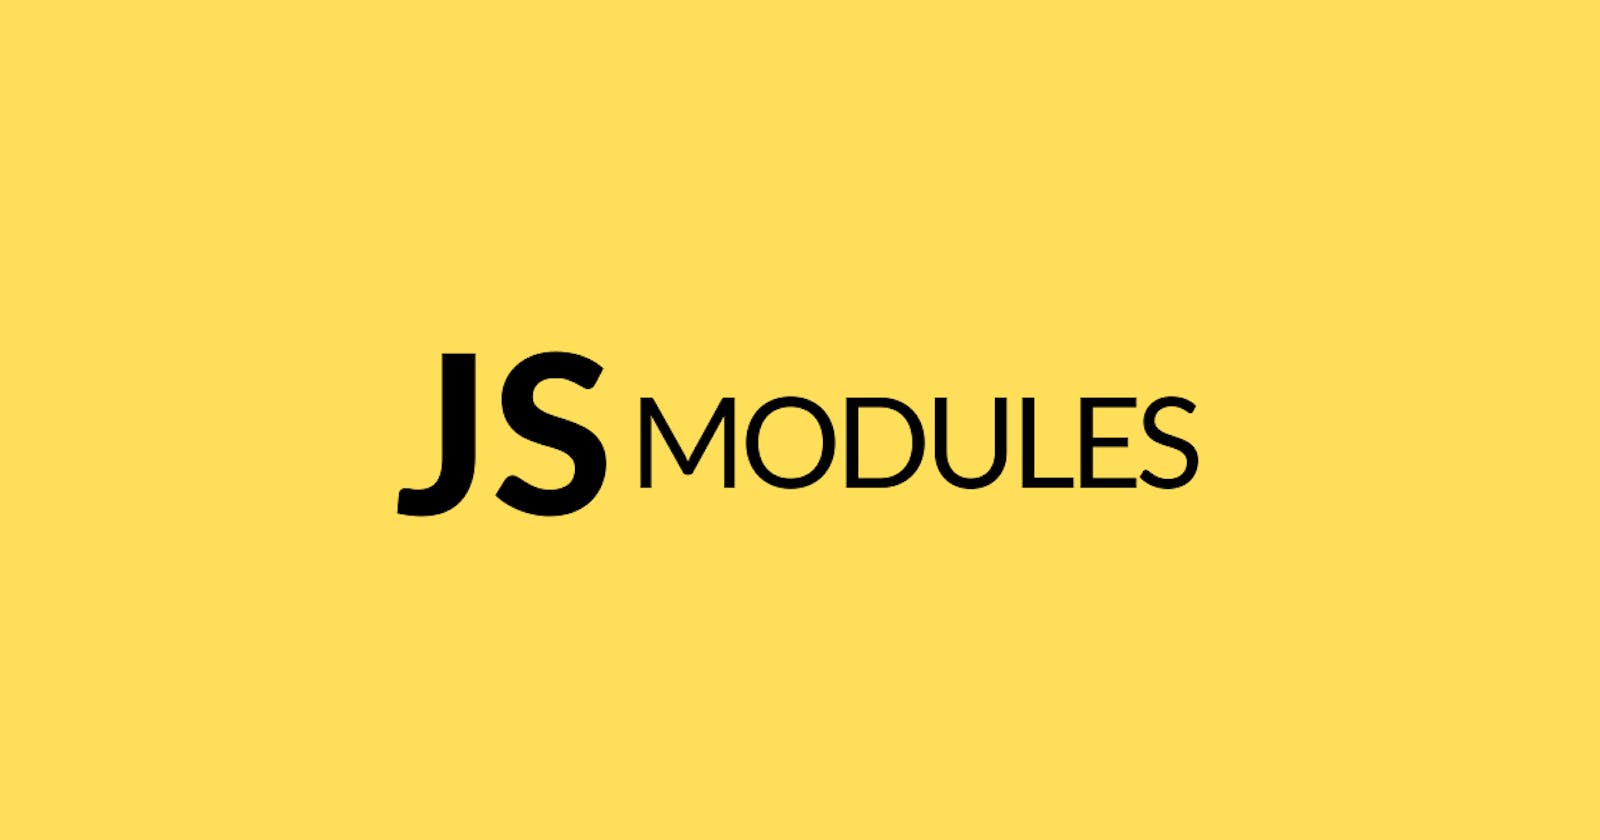 JavaScript Modules: Things You Need to Know